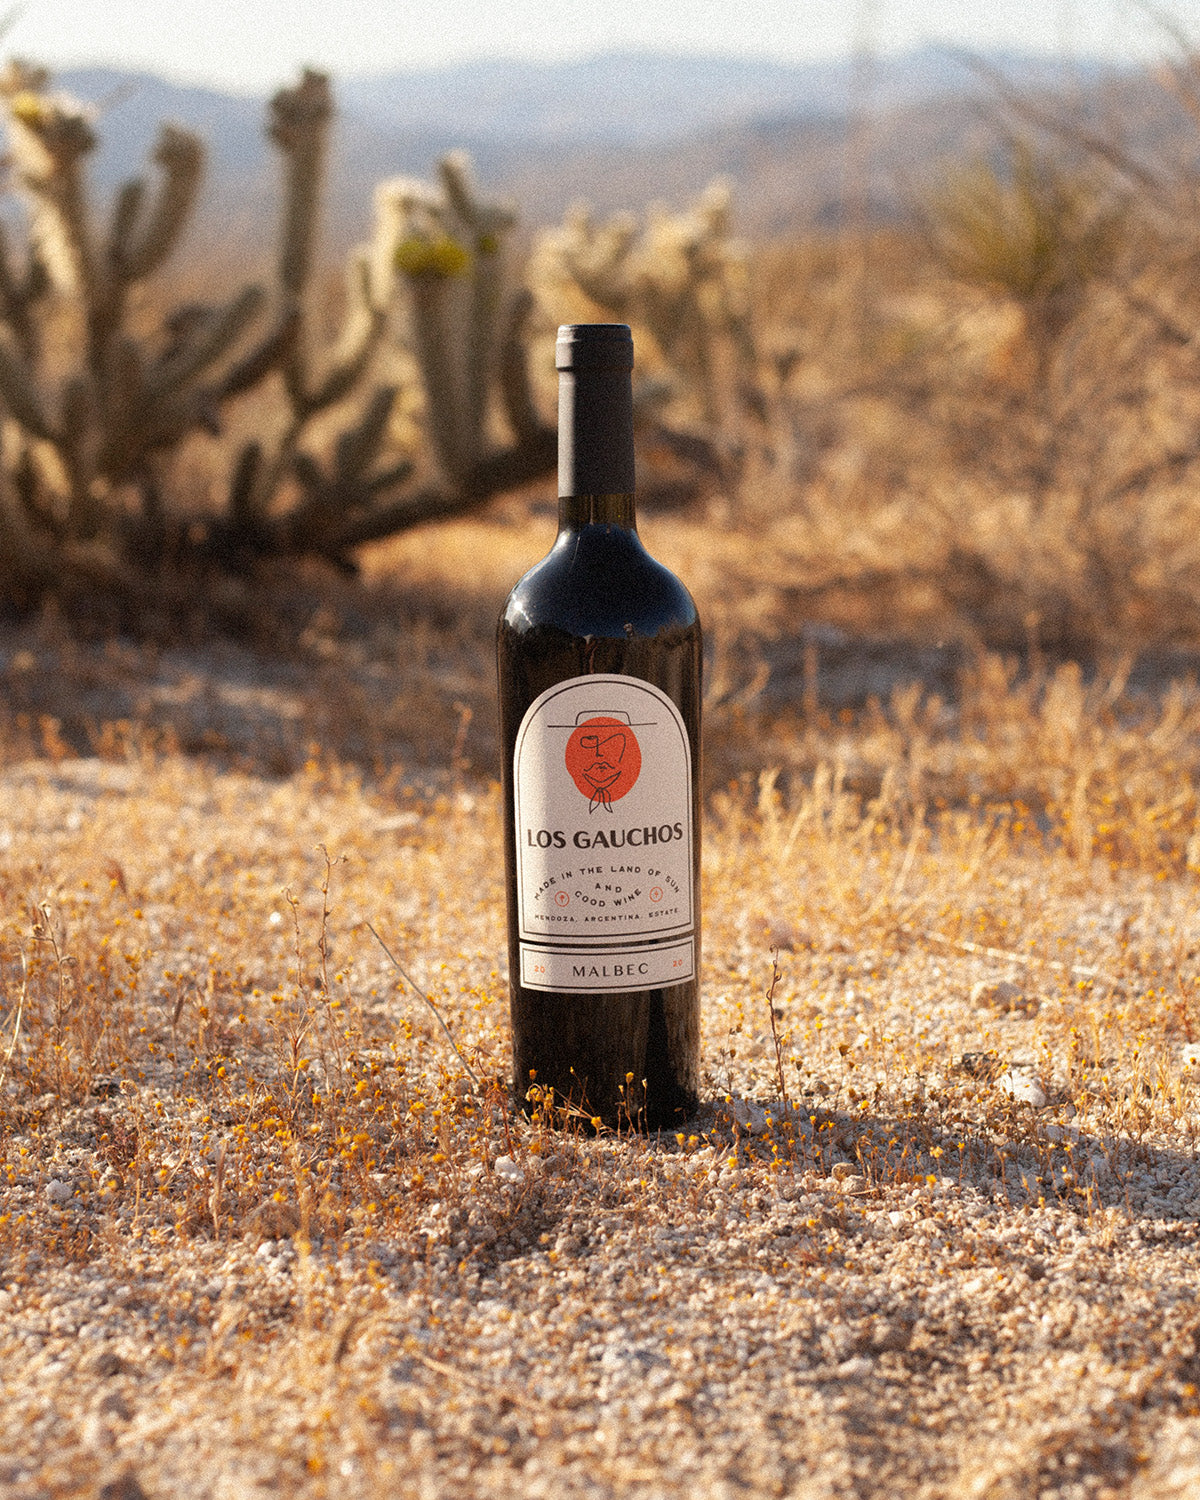 Featured product image displaying Los Gaucho's Malbec